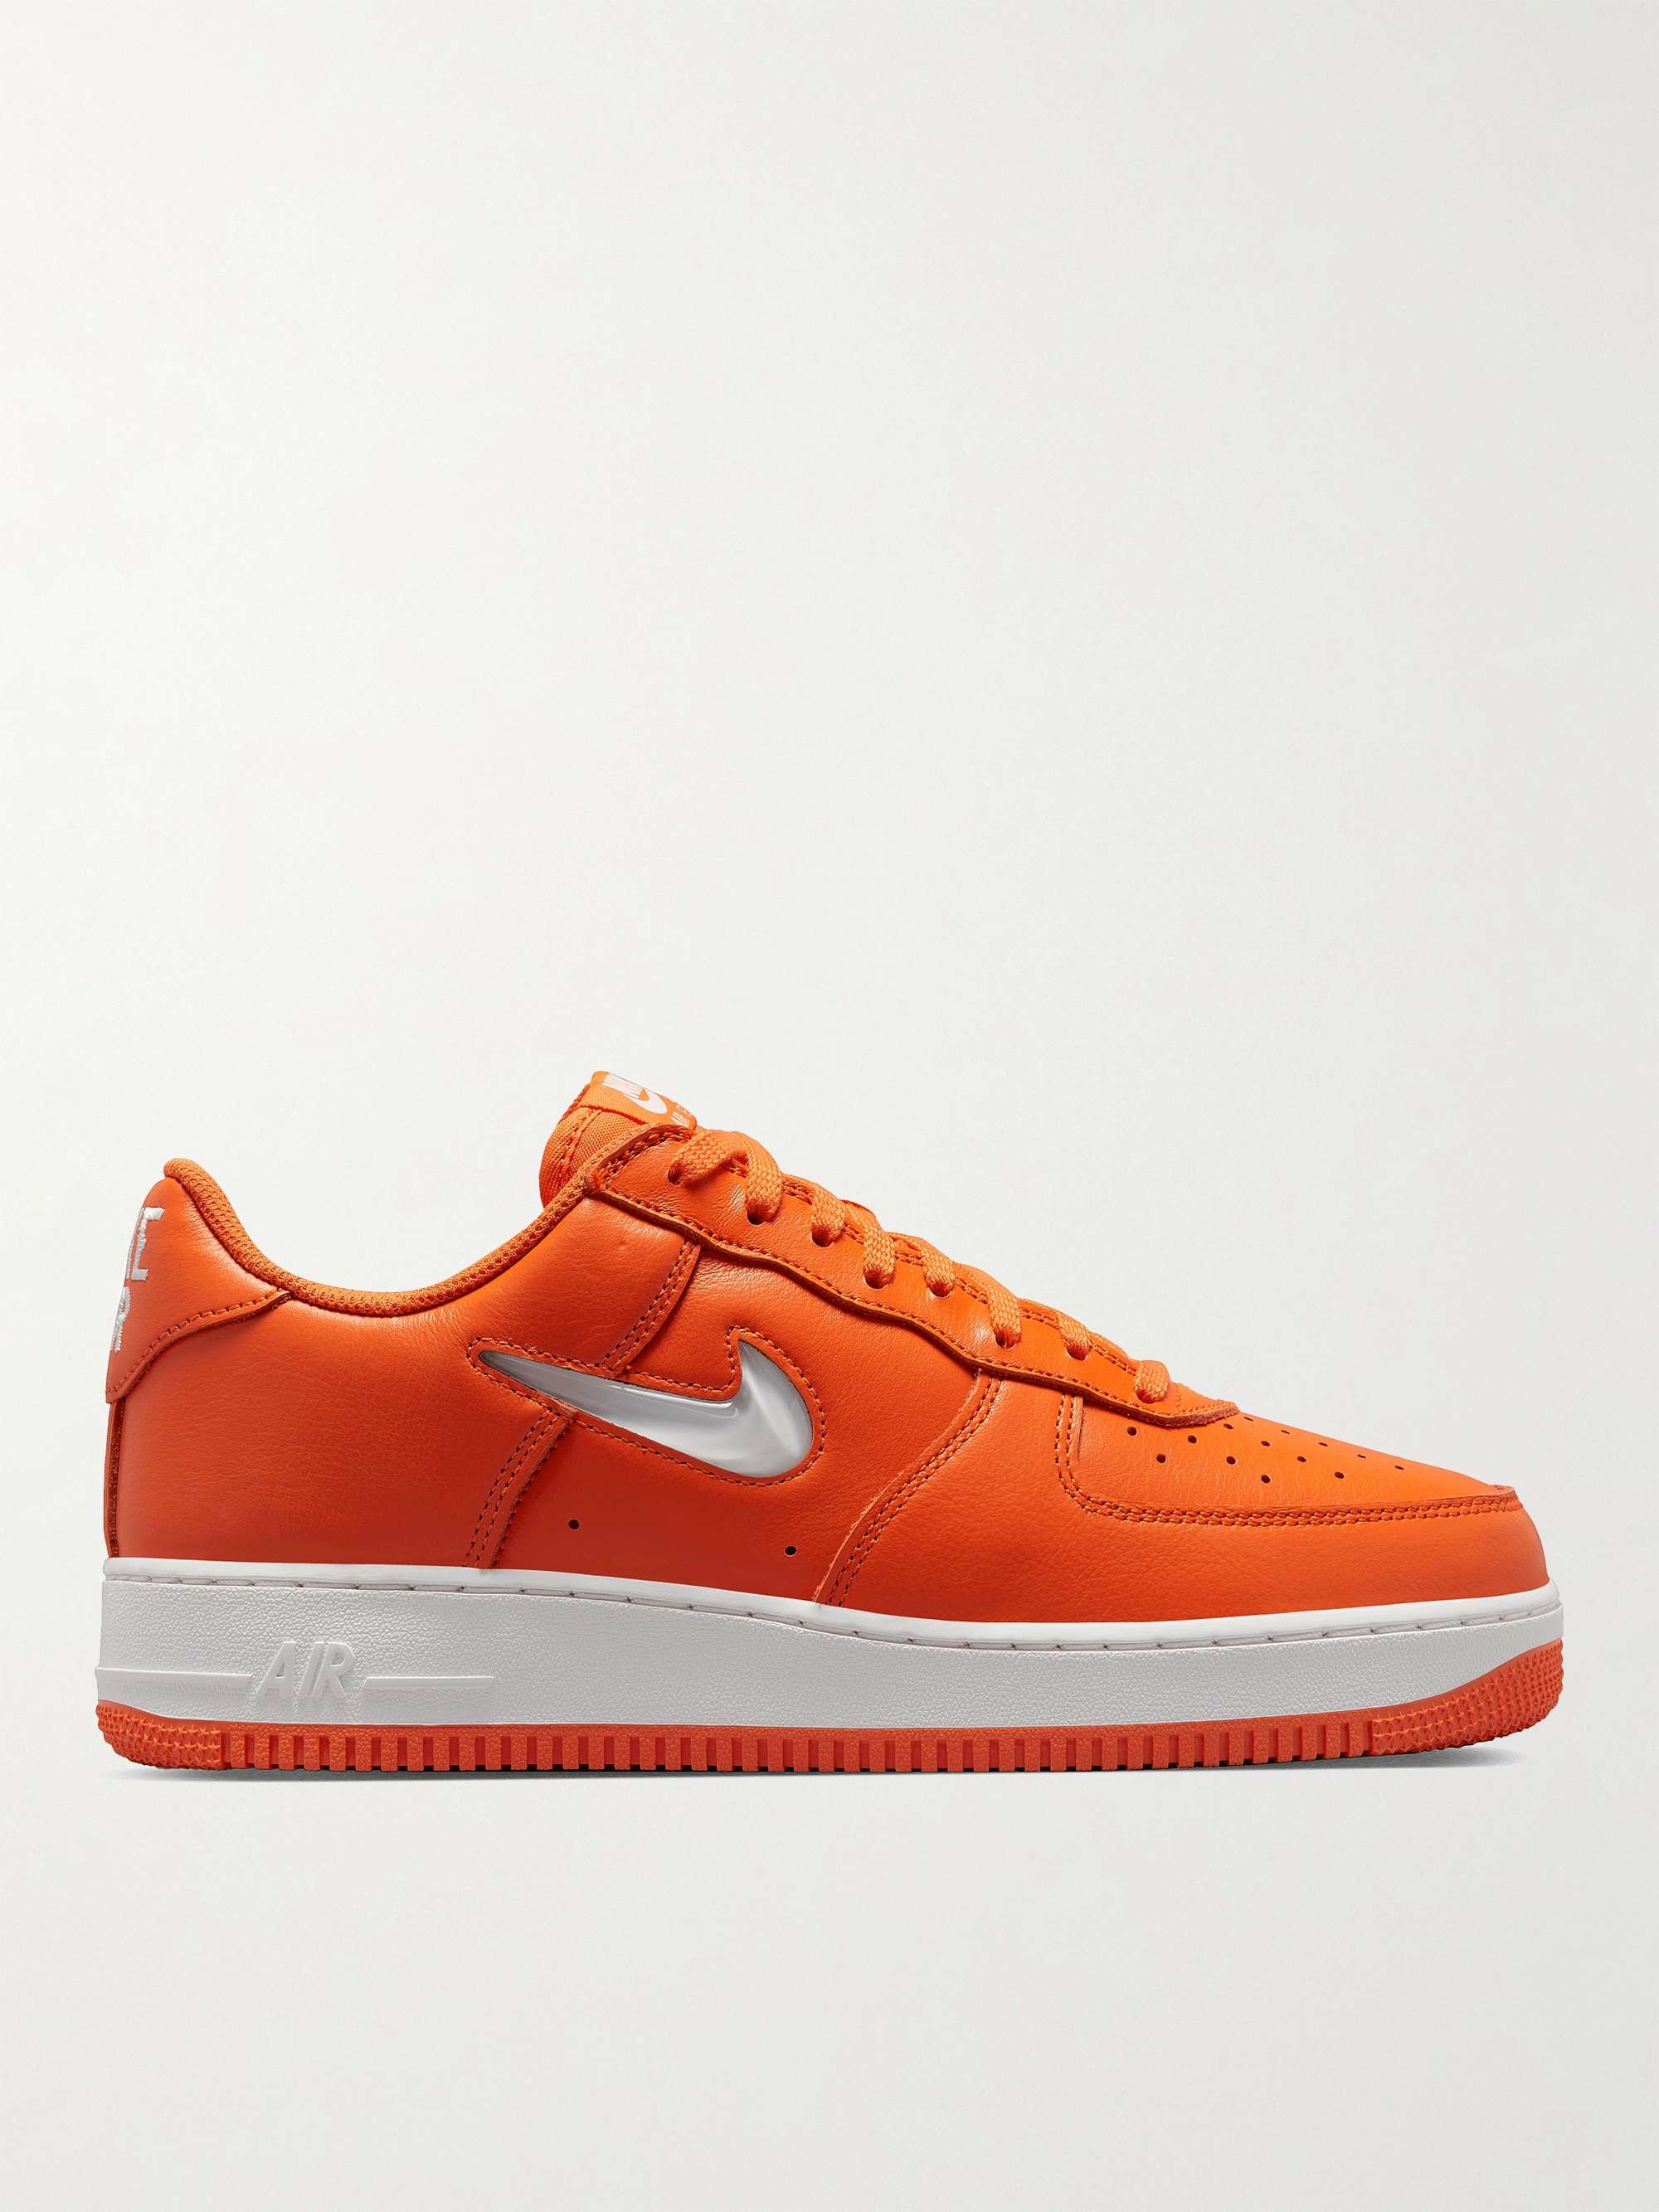 NIKE Air Force 1 Low Retro Jewel Leather Sneakers | MR PORTER